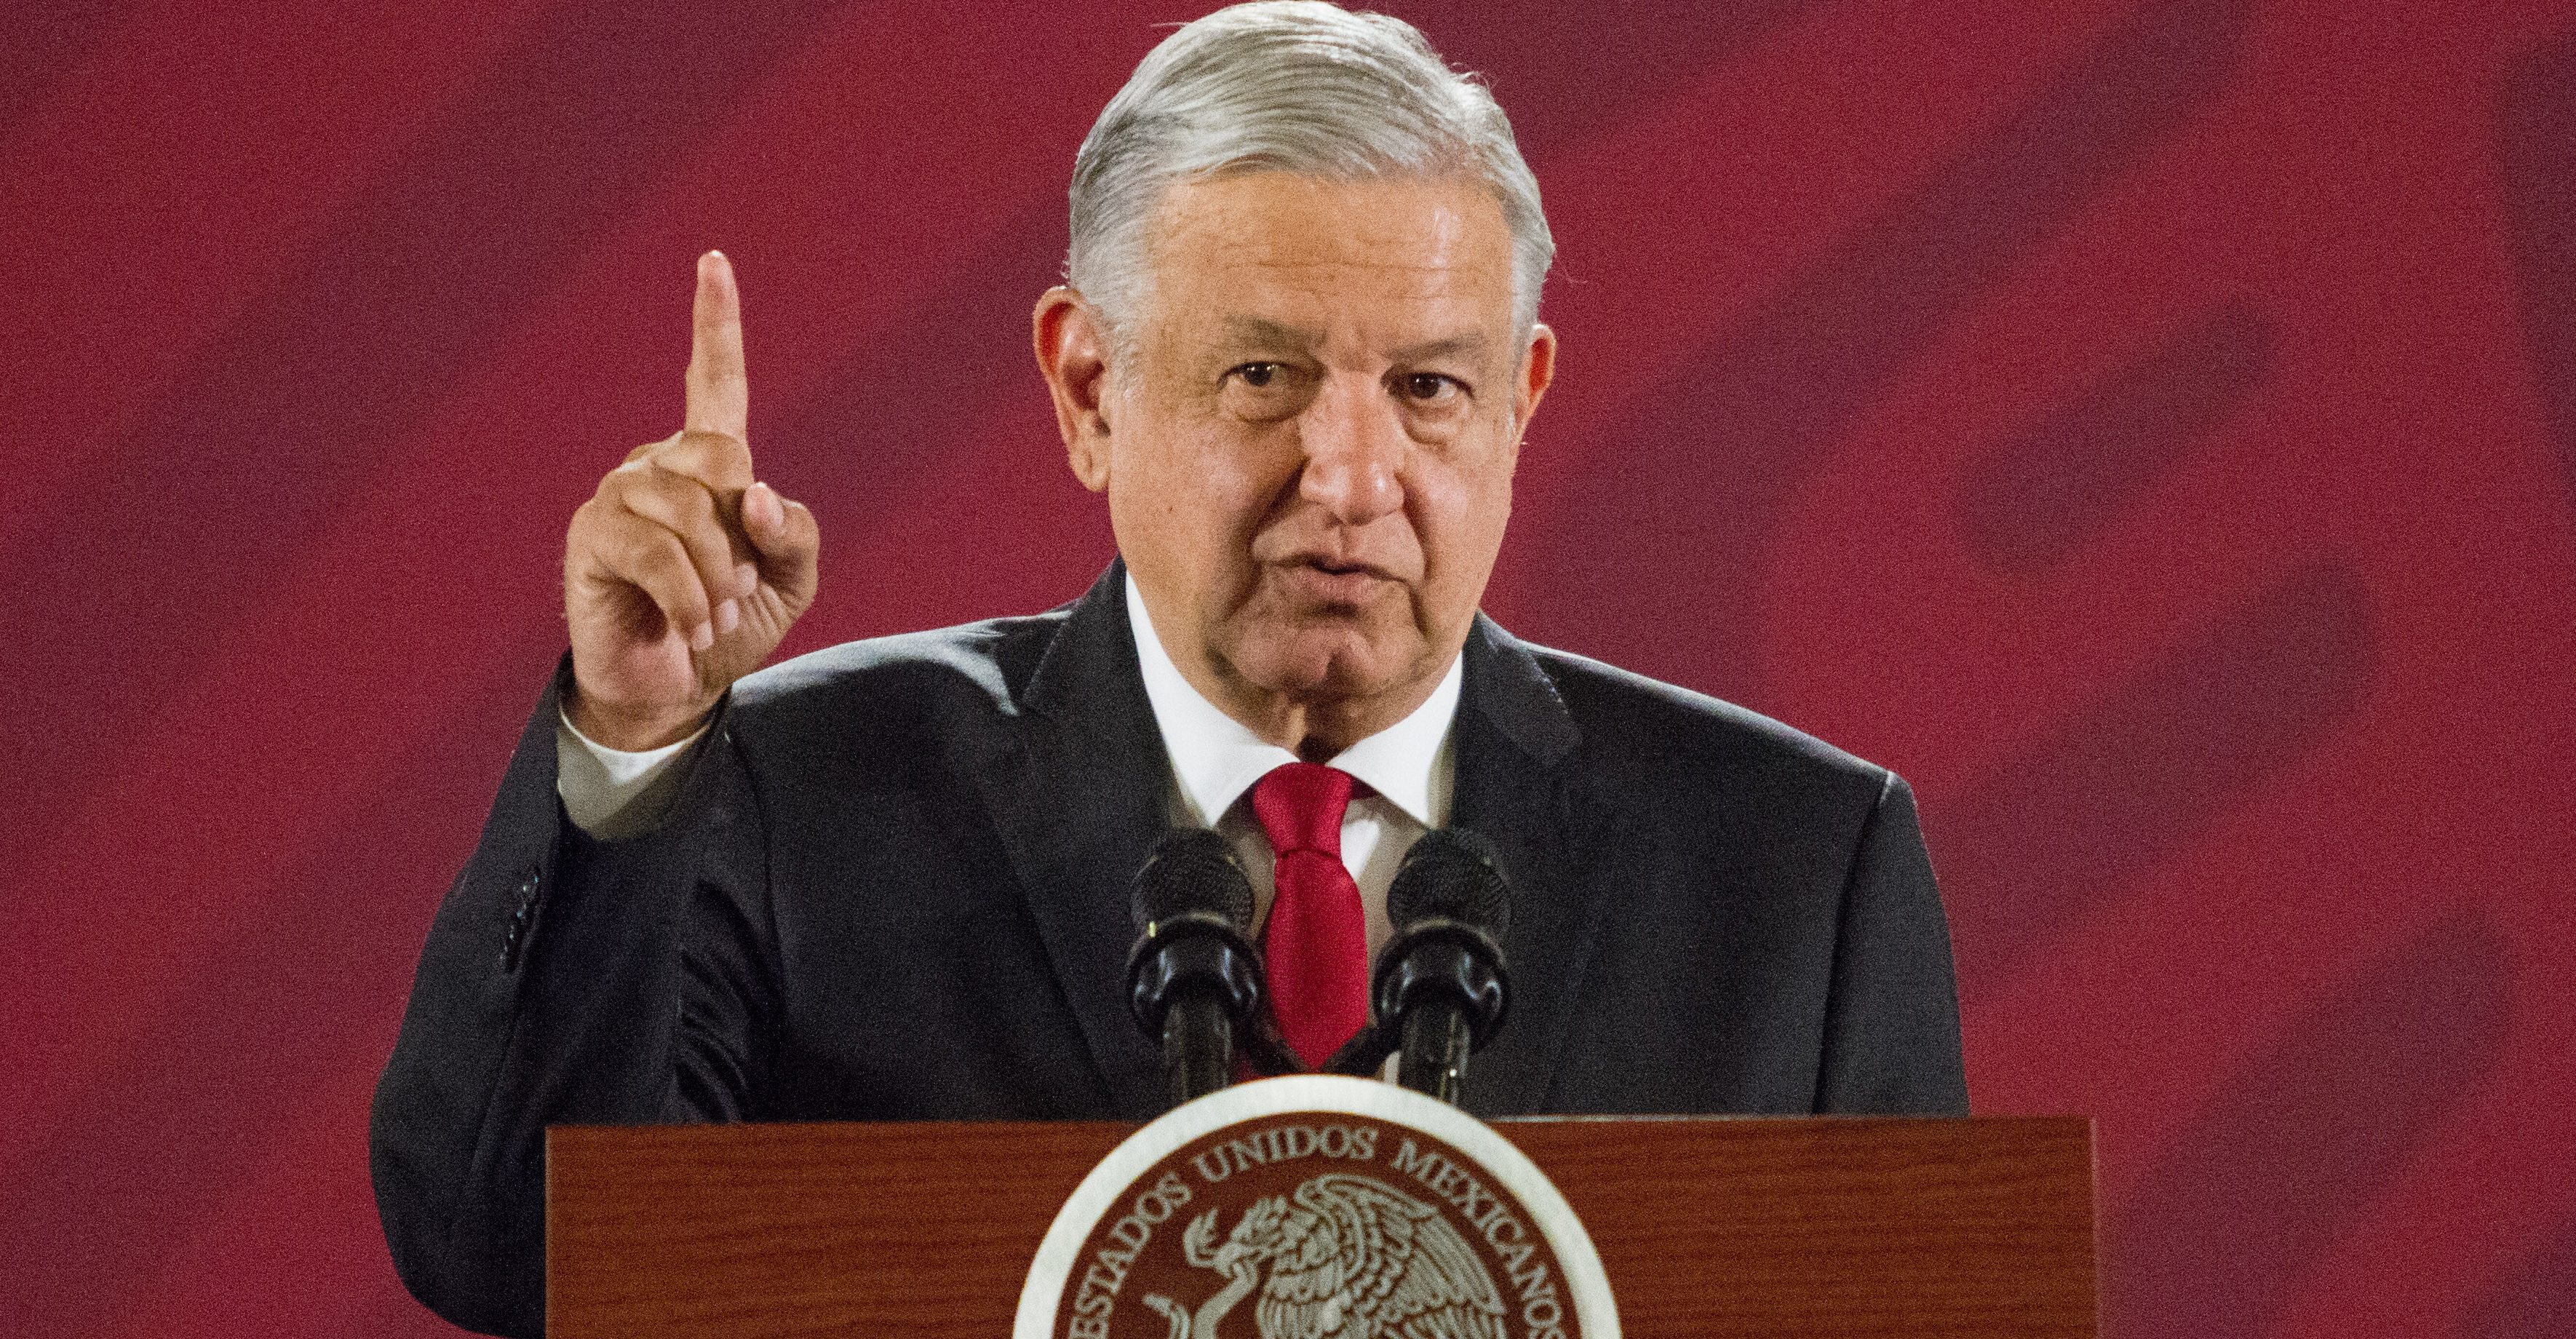 The disappearance of powers should not be used as political revenge: AMLO